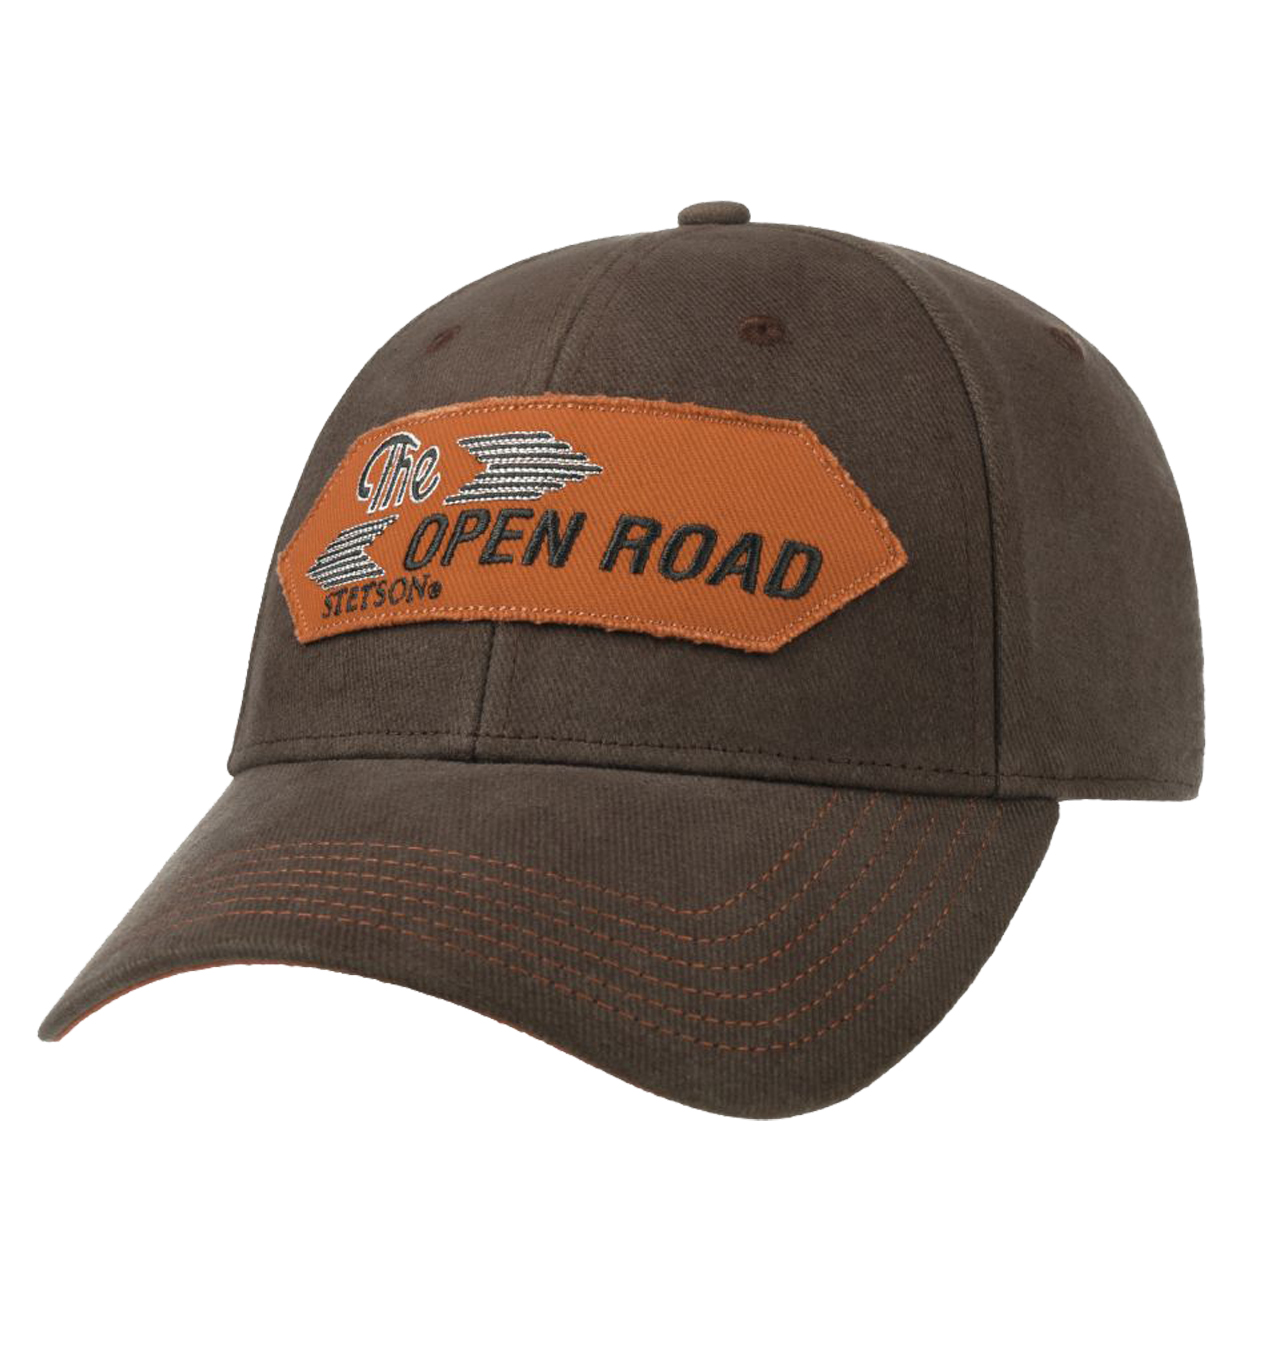 Stetson---The-Open-Road-Cap---Brown1